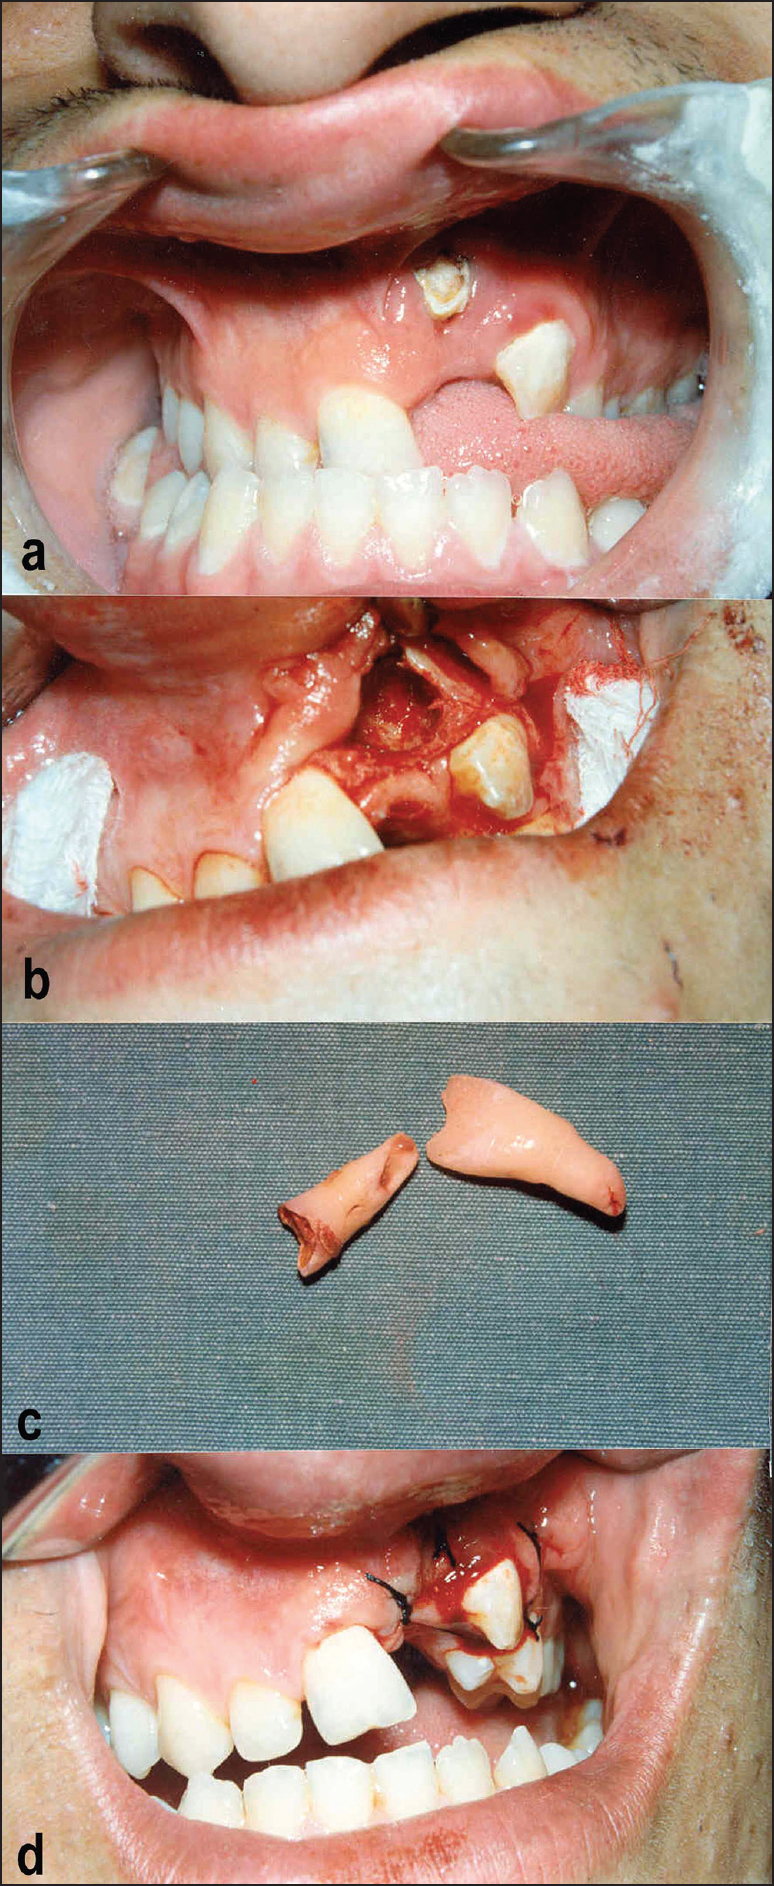 Figure 1: Photographs of the surgical procedure: (a) Upper left central and left lateral incisor teeth showing avulsion (unerupted). Anterior and posterior cross-bite with a loss of occlusal contact, except in the right upper first central incisor. (b-d) Surgical approach; impacted tooth roots and infected tissues were removed